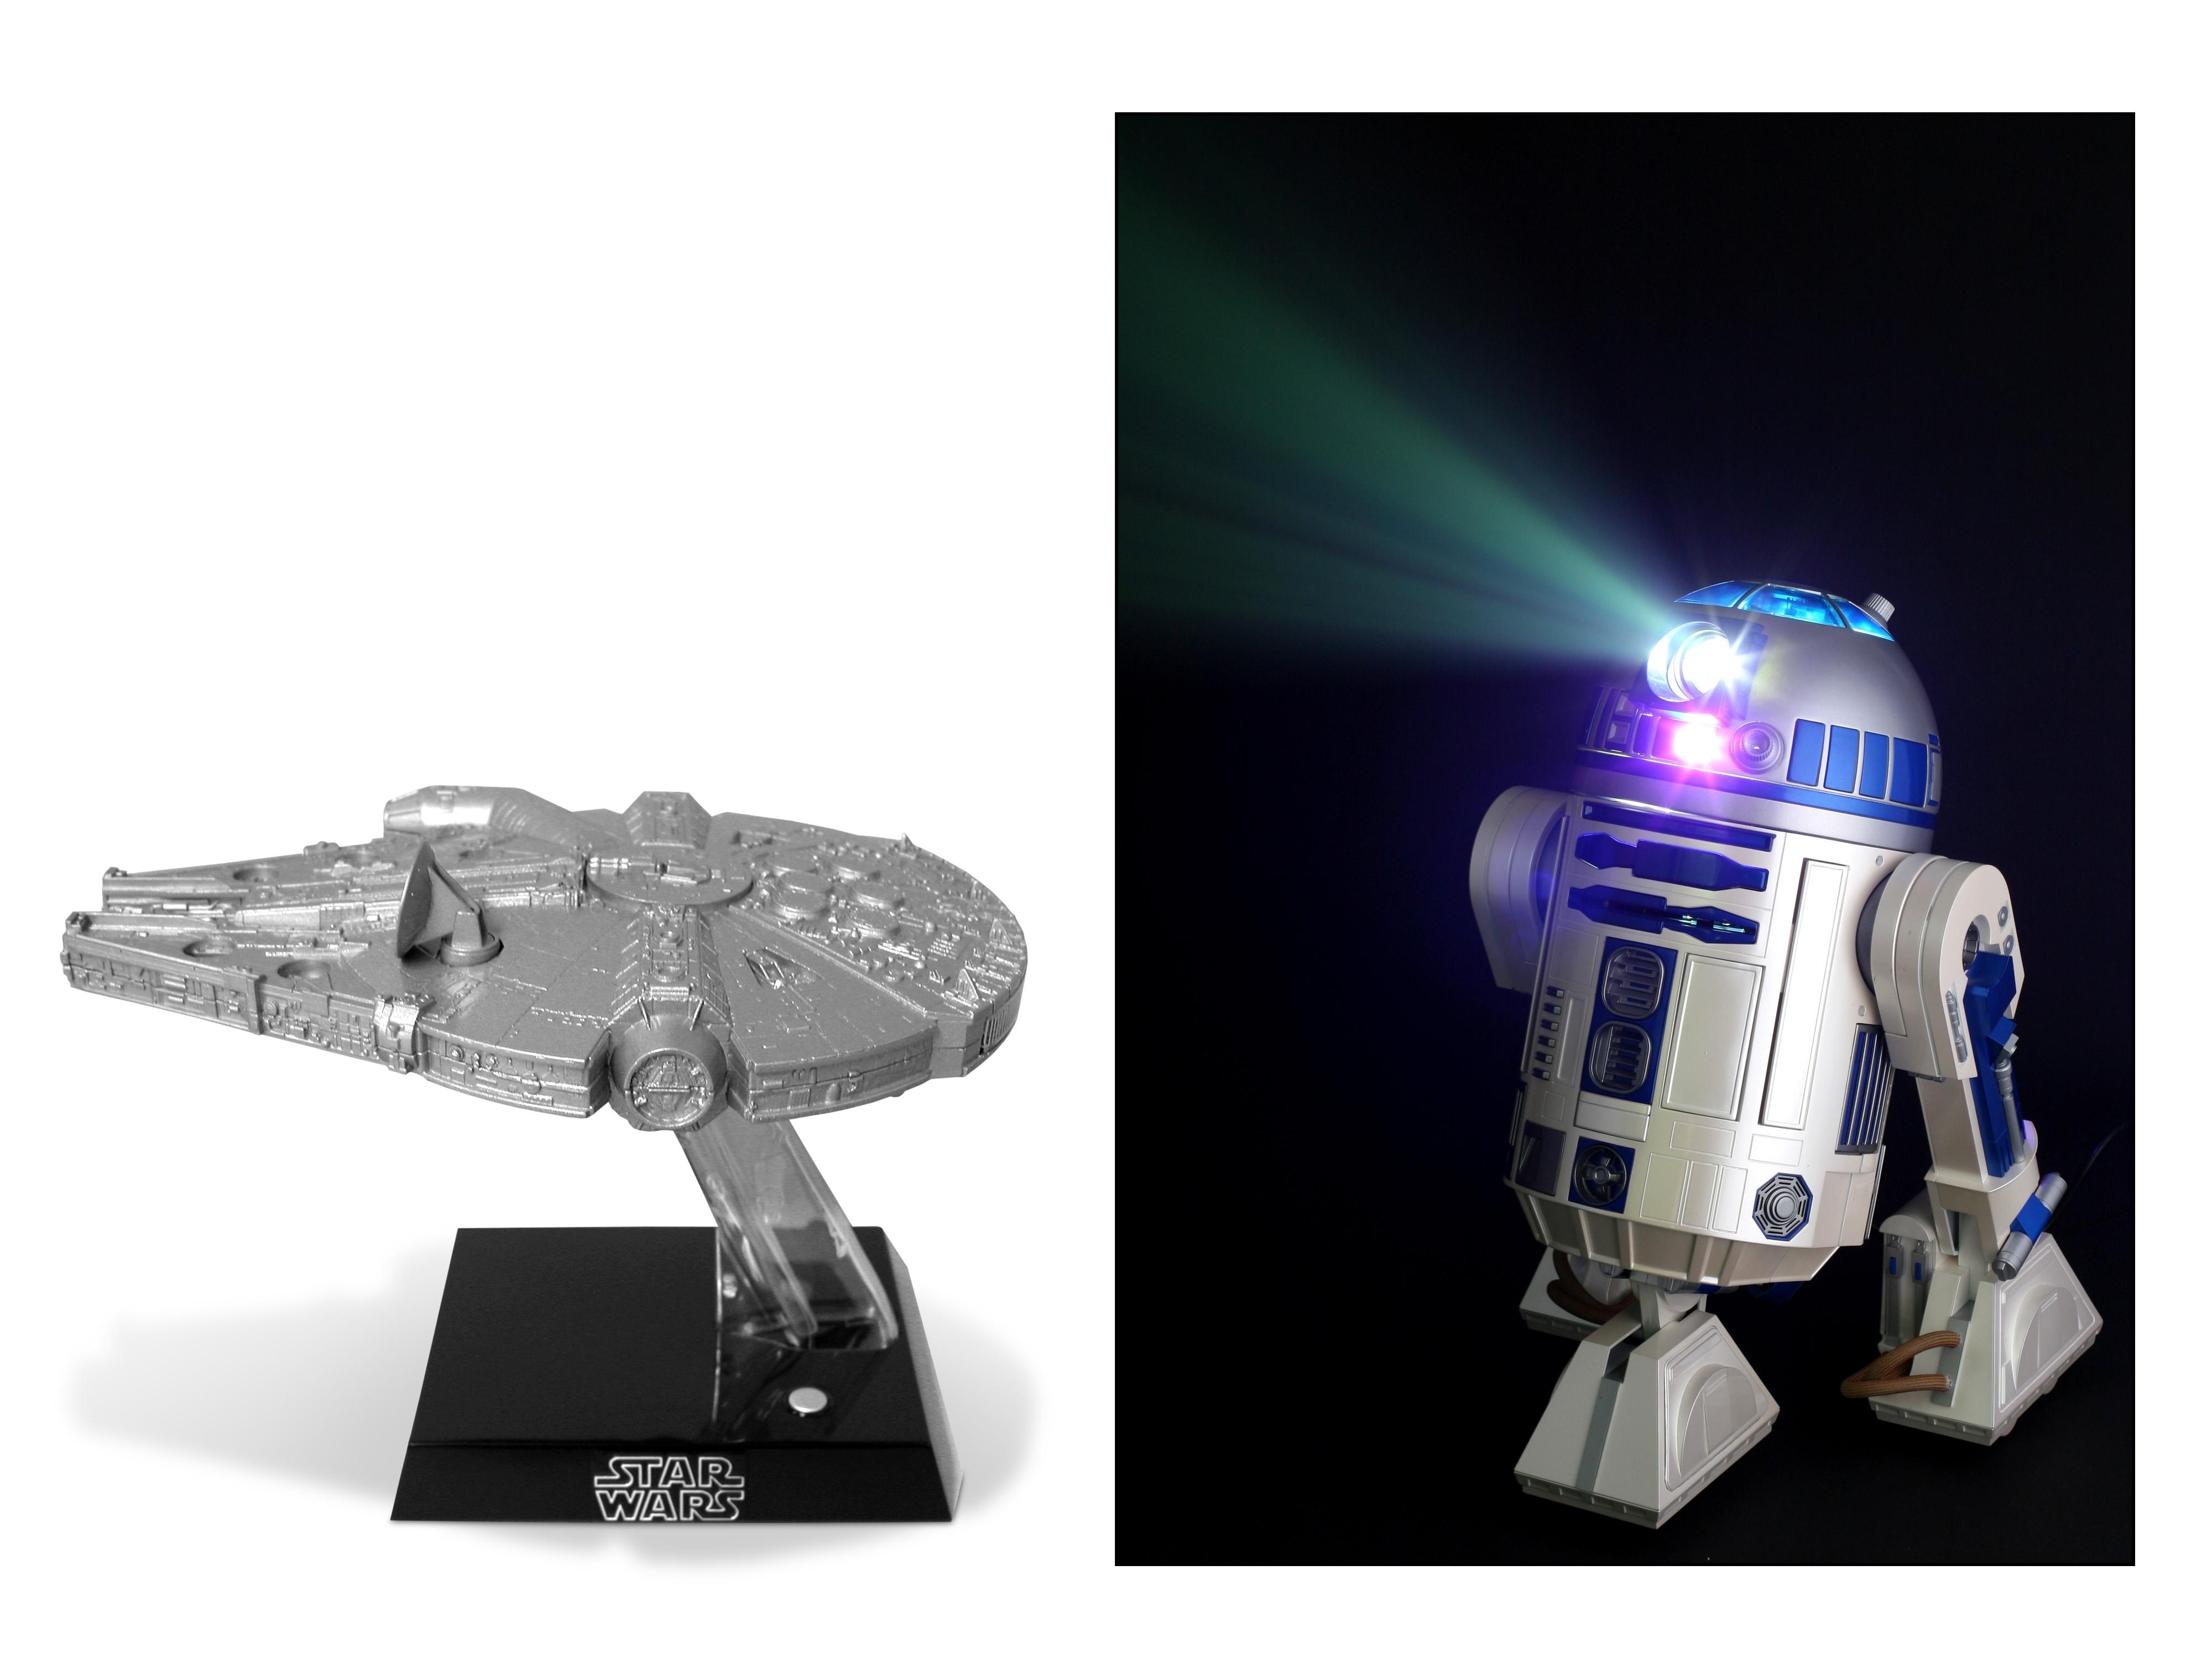 Anker Nebula R2-D2 Projector is the Droid I'm Looking For